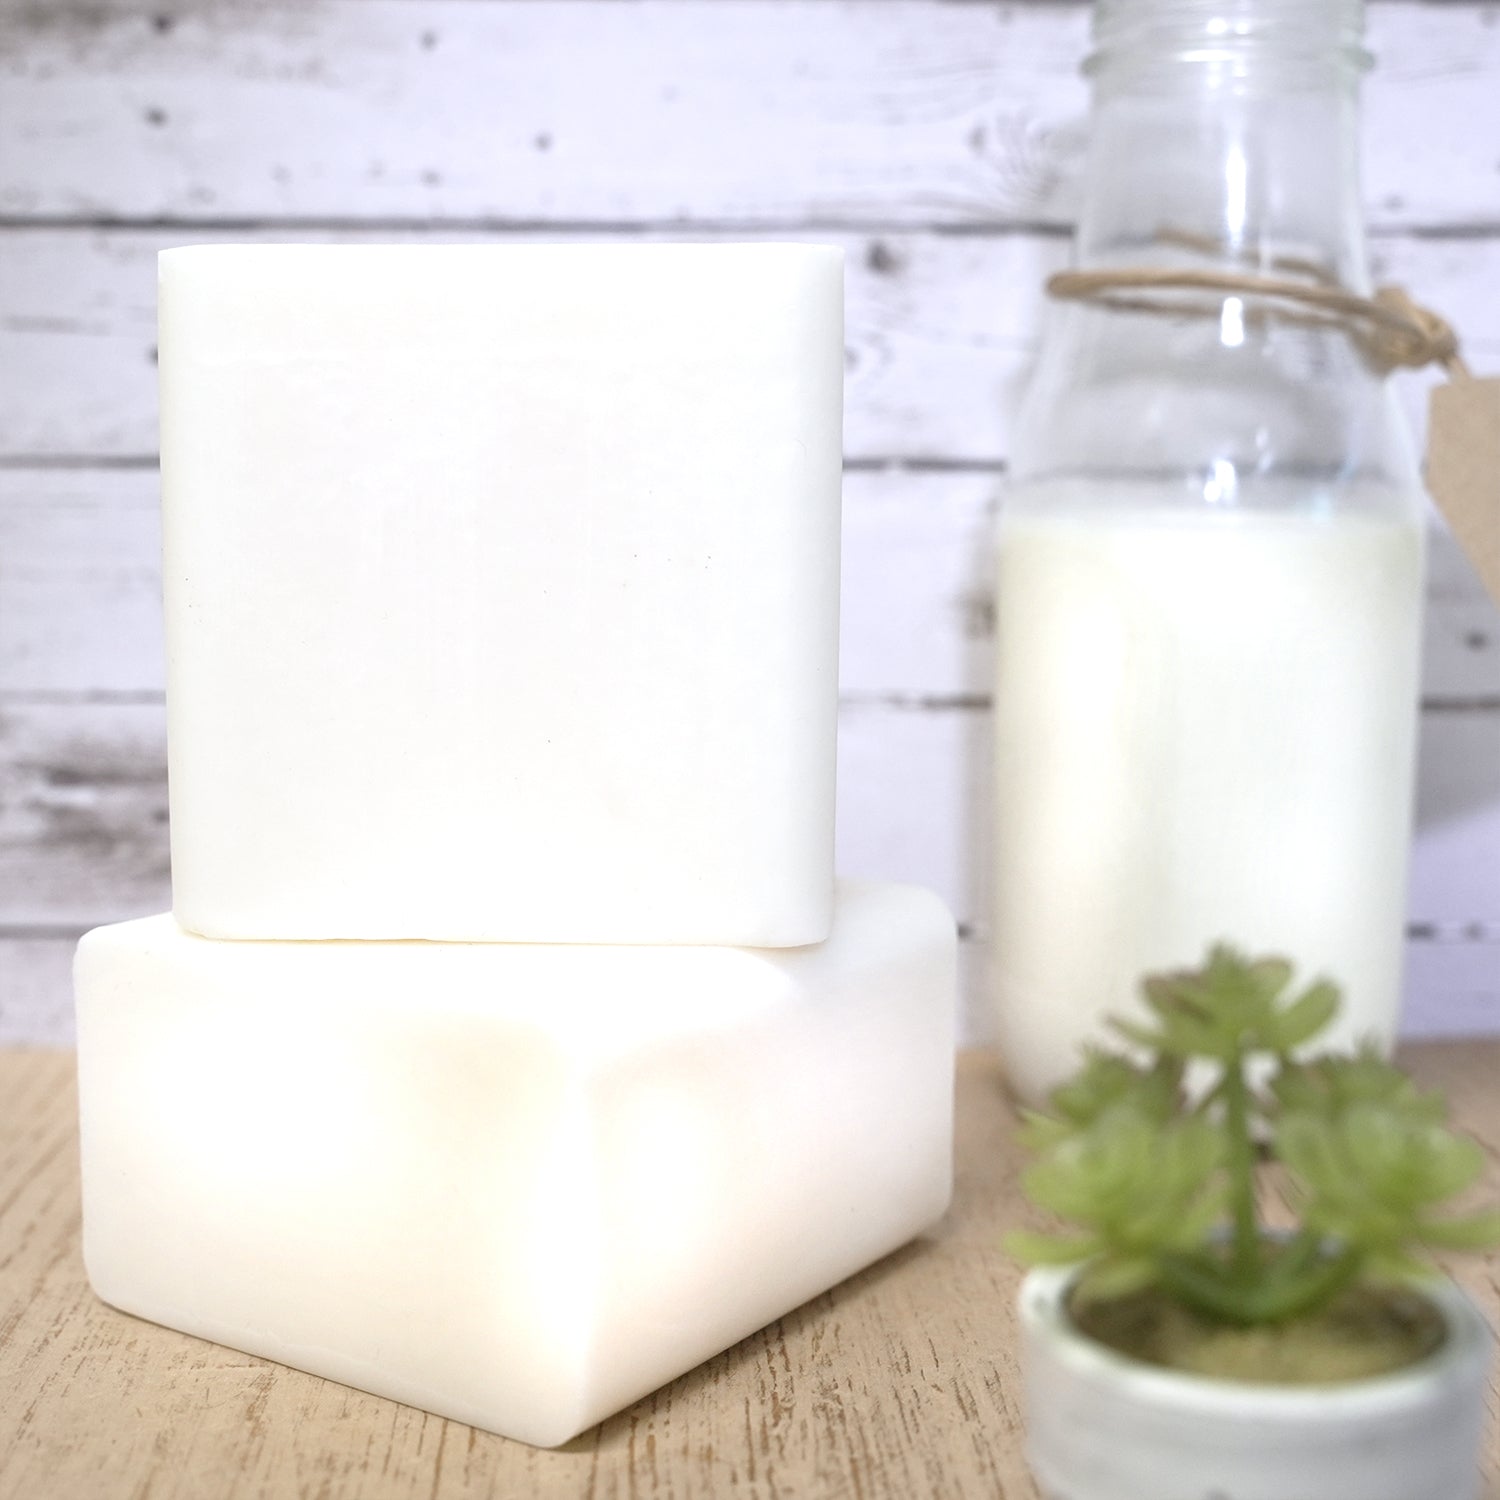 Buy Online Goats Milk Melt and Pour Soap Base - MakeYourOwn